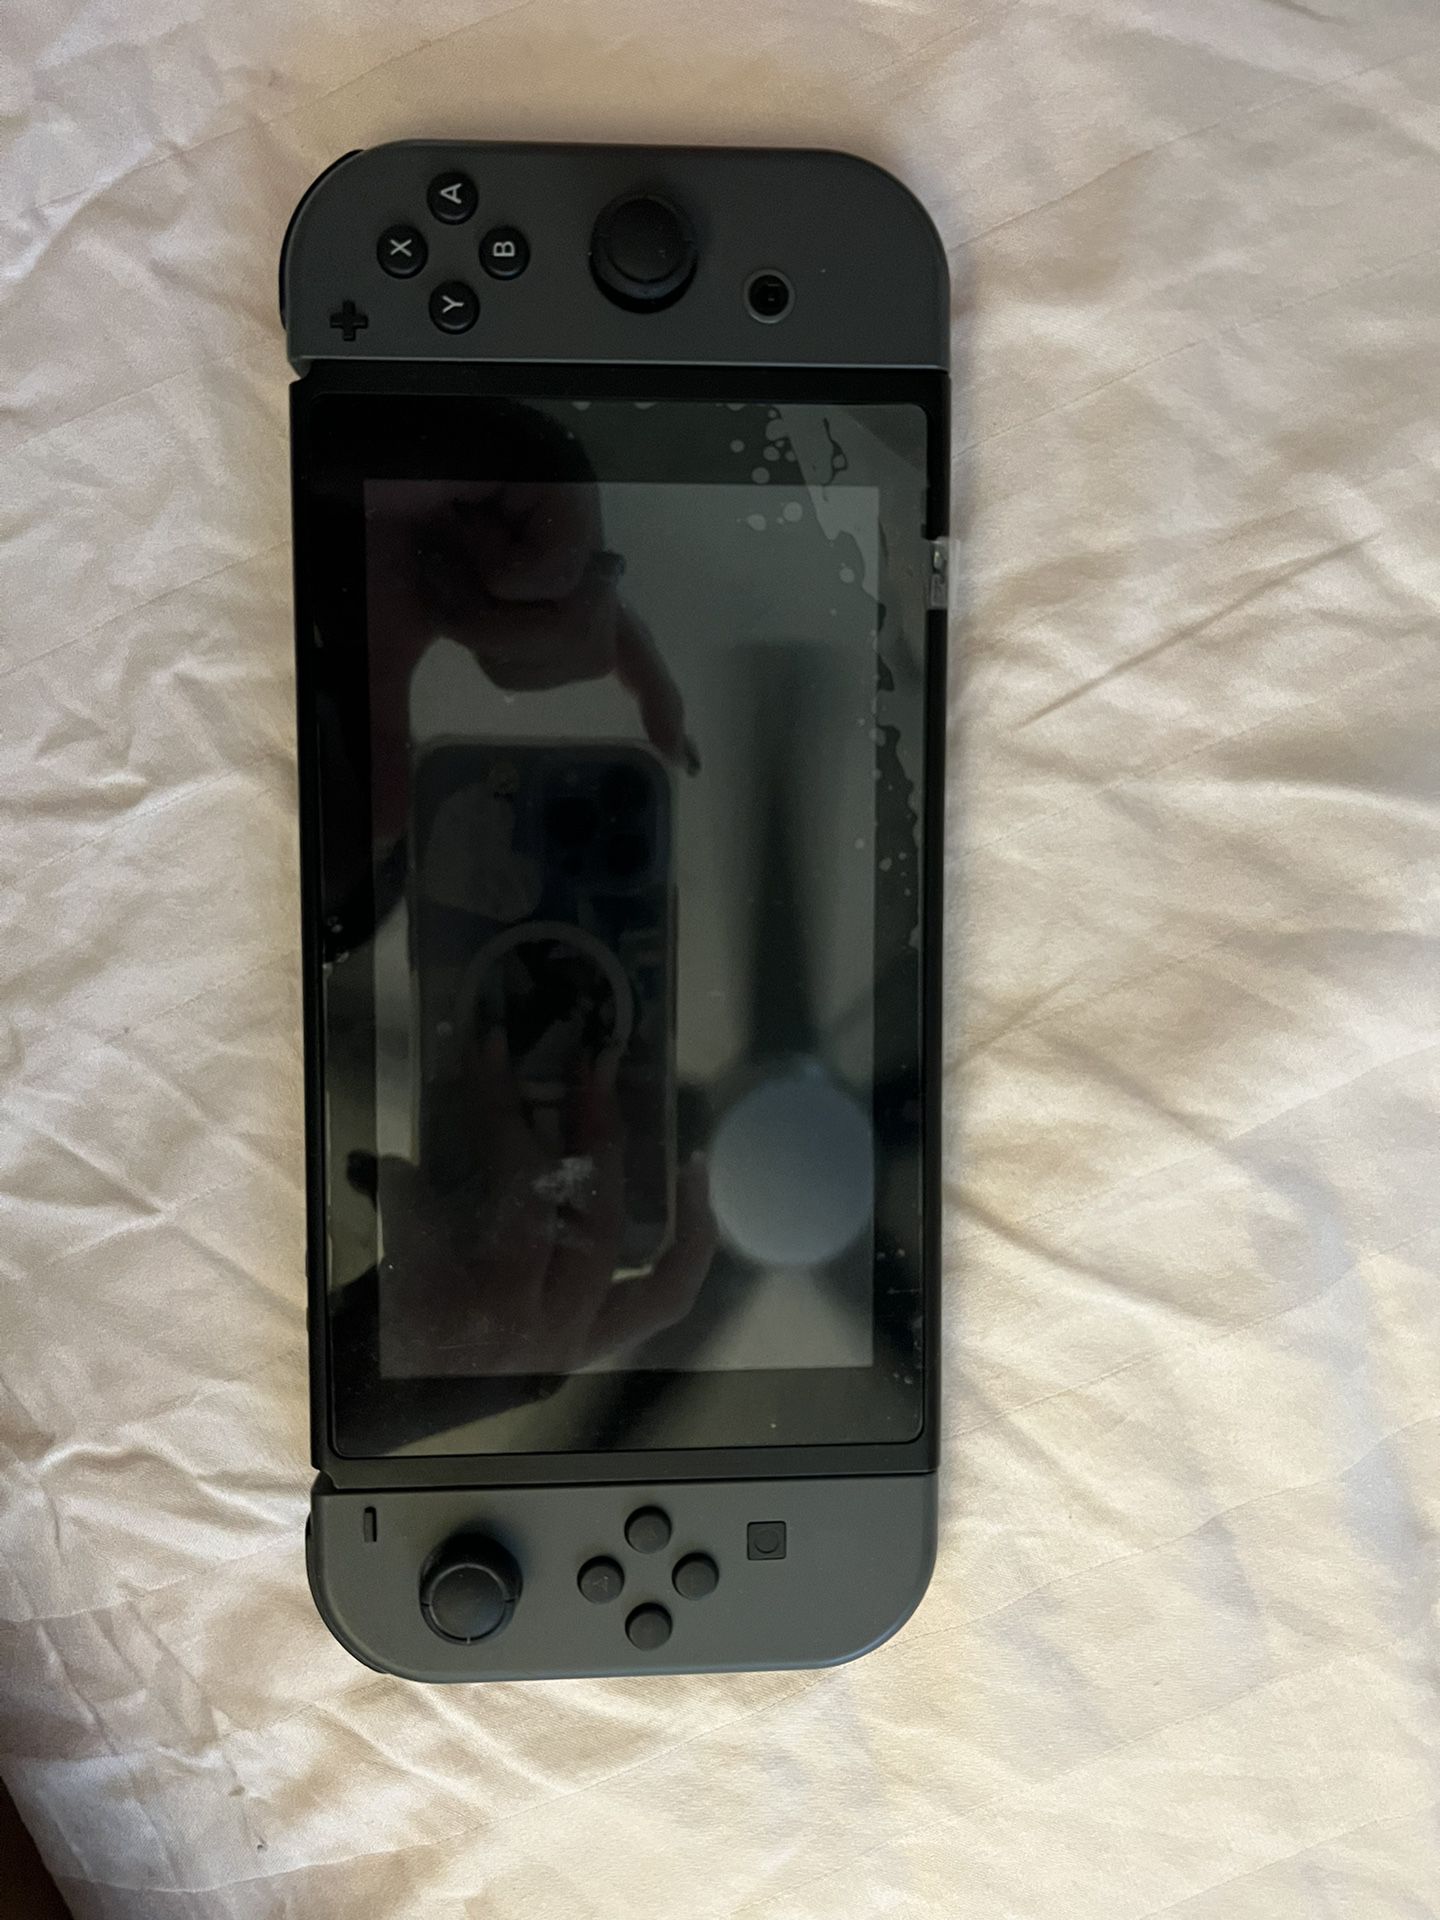 Nintendo Switch Console with Gray Joy-Con Controller